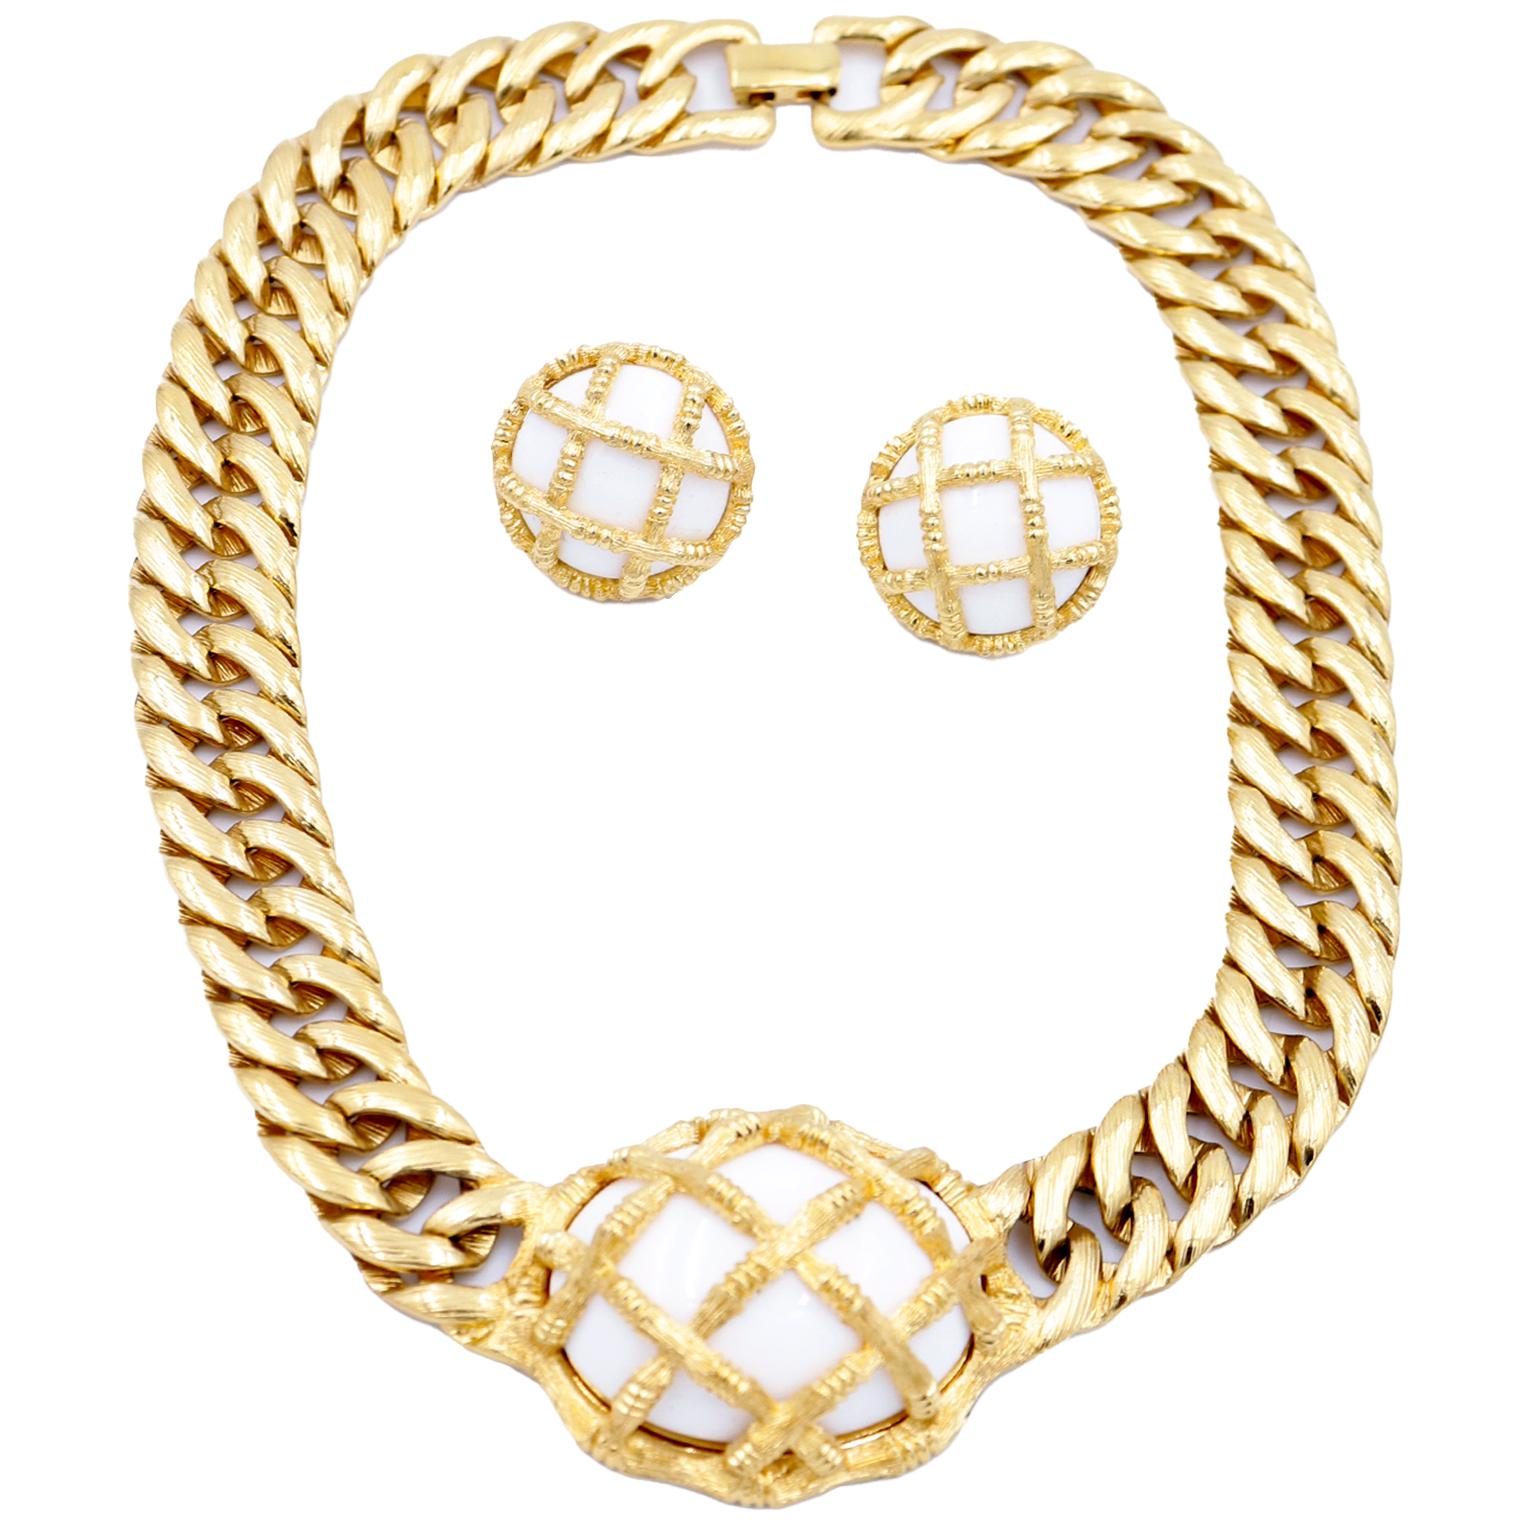 This is a really unique vintage 1980's Monet gold necklace and earring set with white caged domes nicely contrasting the luxe gold. Vintage Monet jewelry is made so well and they used only  the finest costume jewelry materials. When you compare a